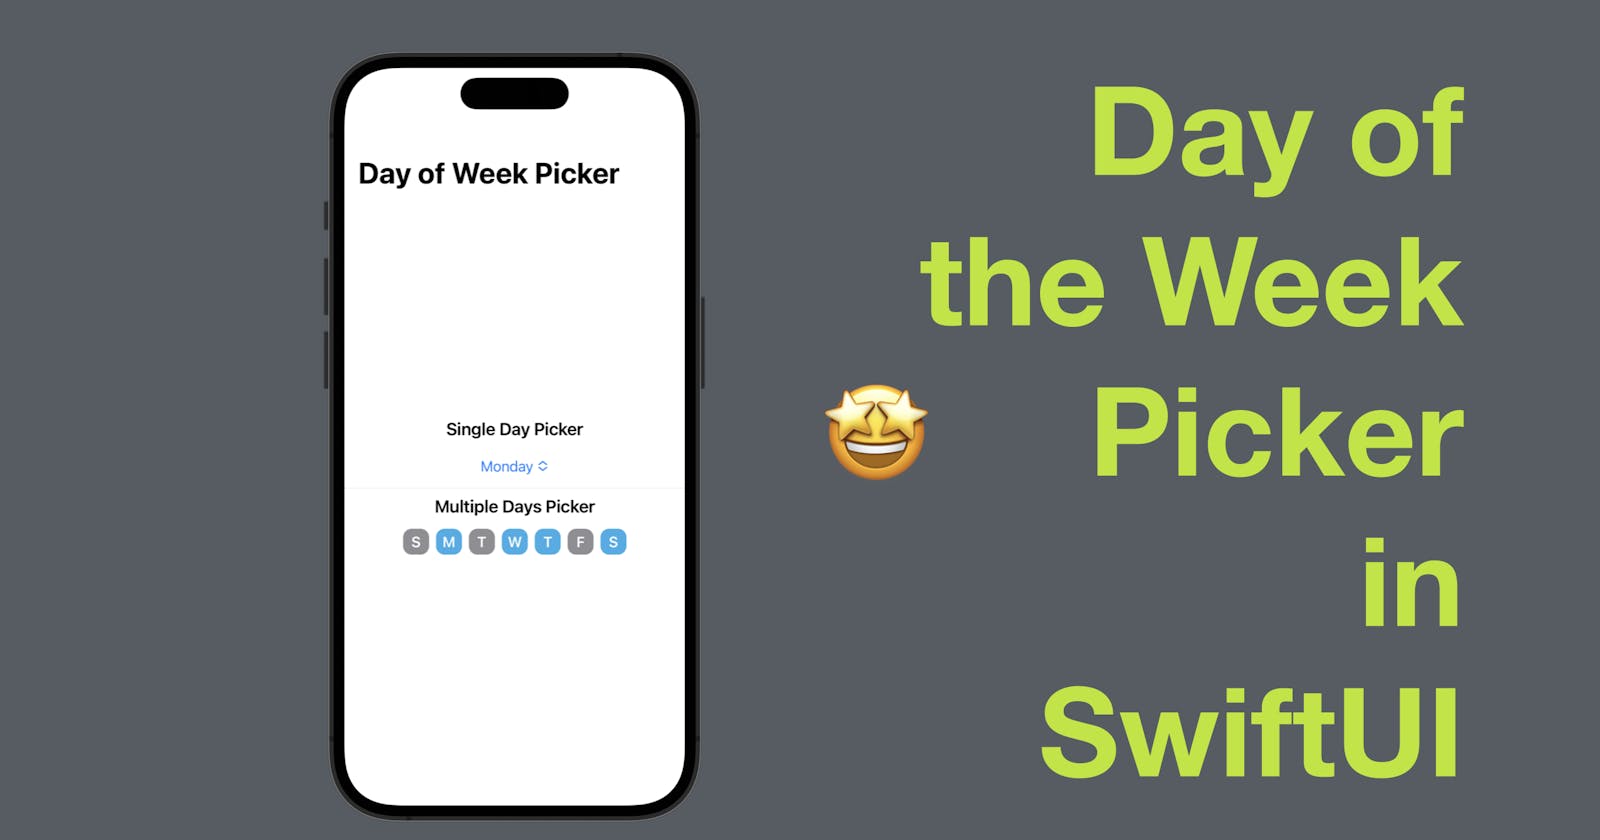 Day of the Week Picker in SwiftUI